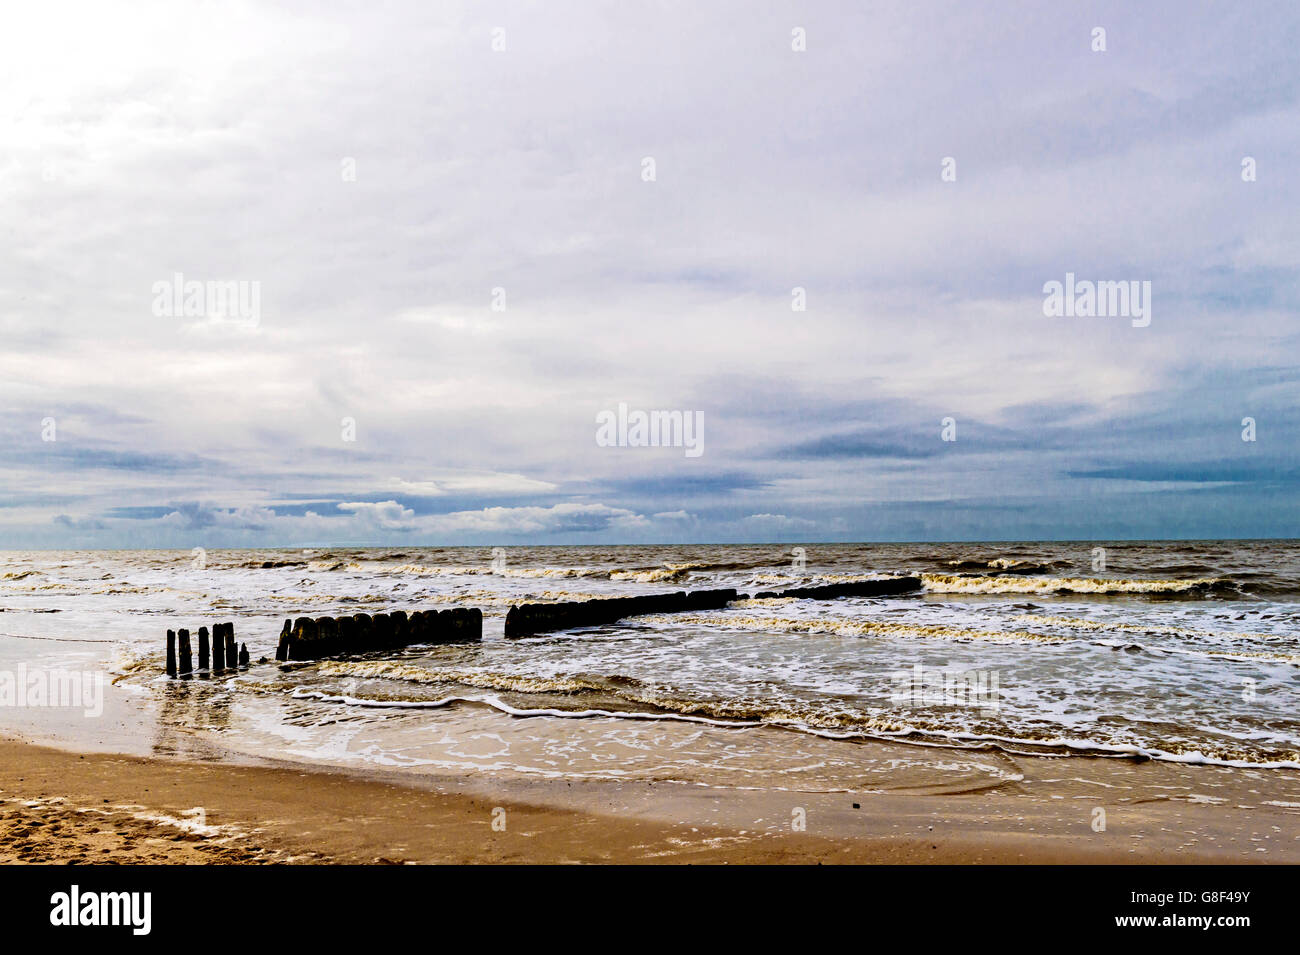 Beach on the isle of Sylt, northern Germany; am strand von Sylt Stock Photo